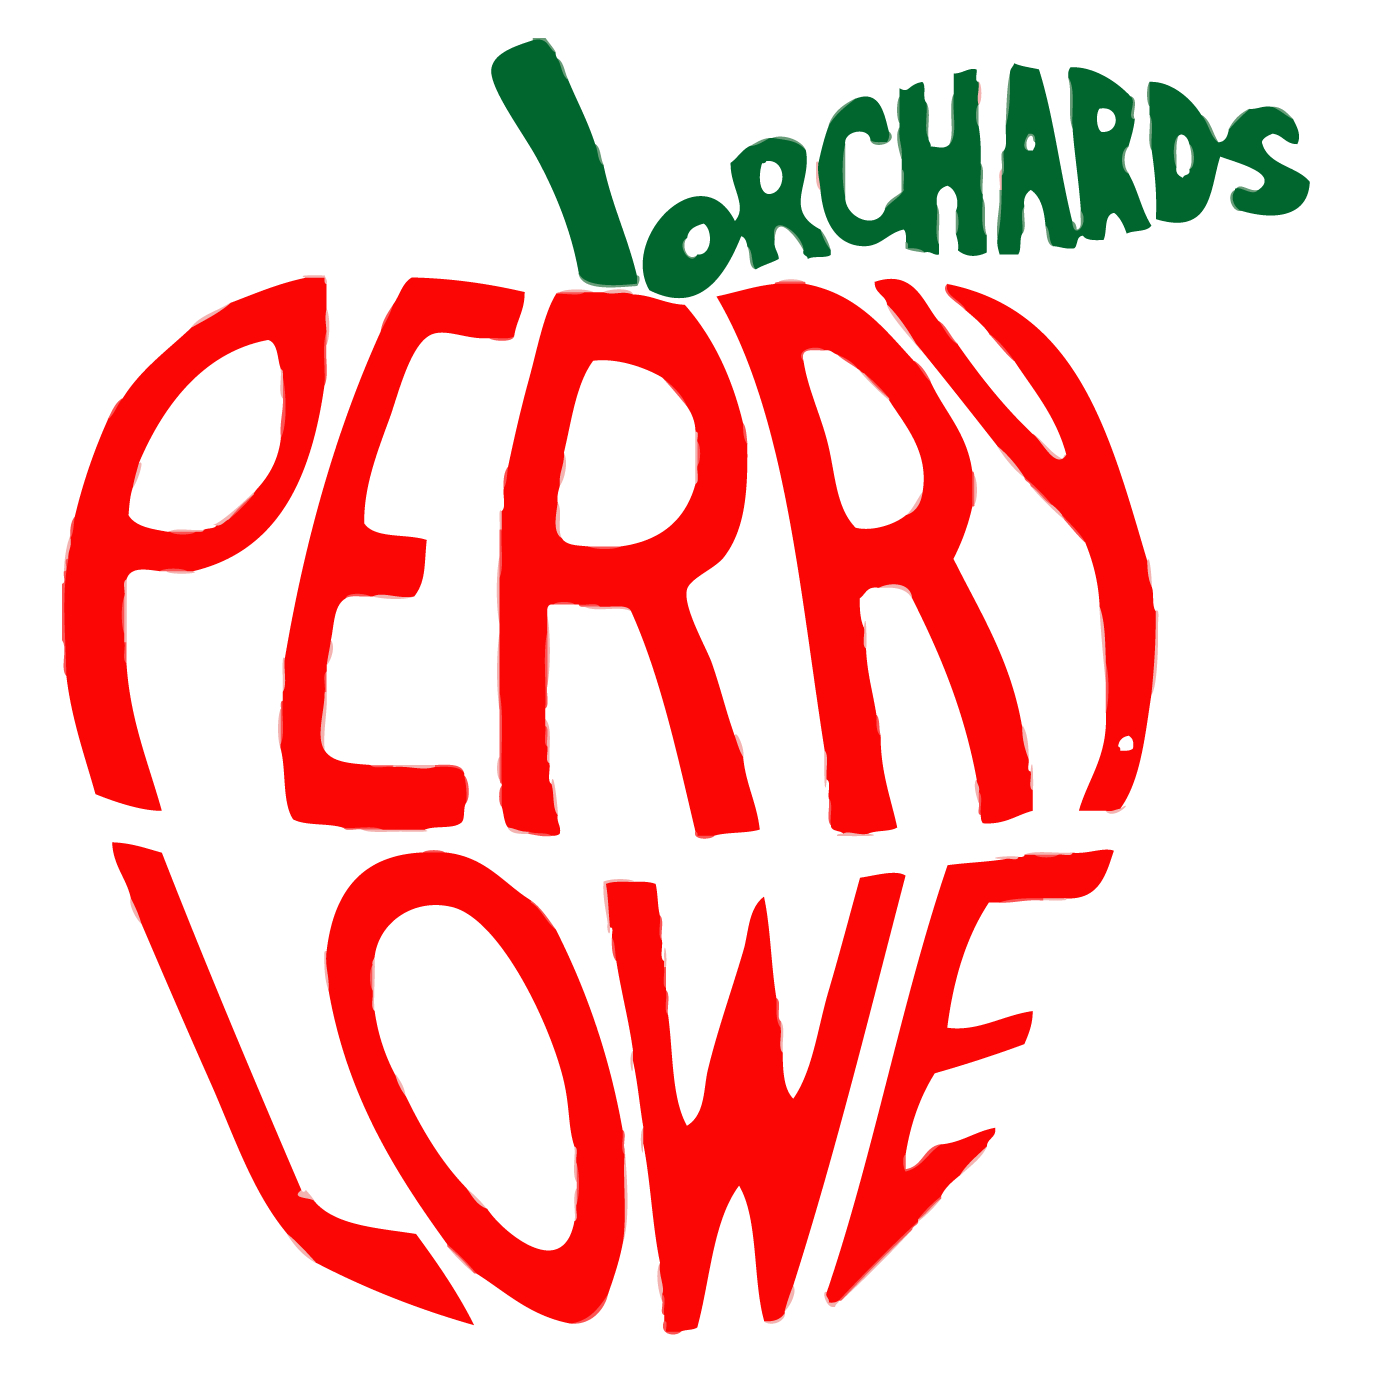 Perry Lowe Orchards, LLC